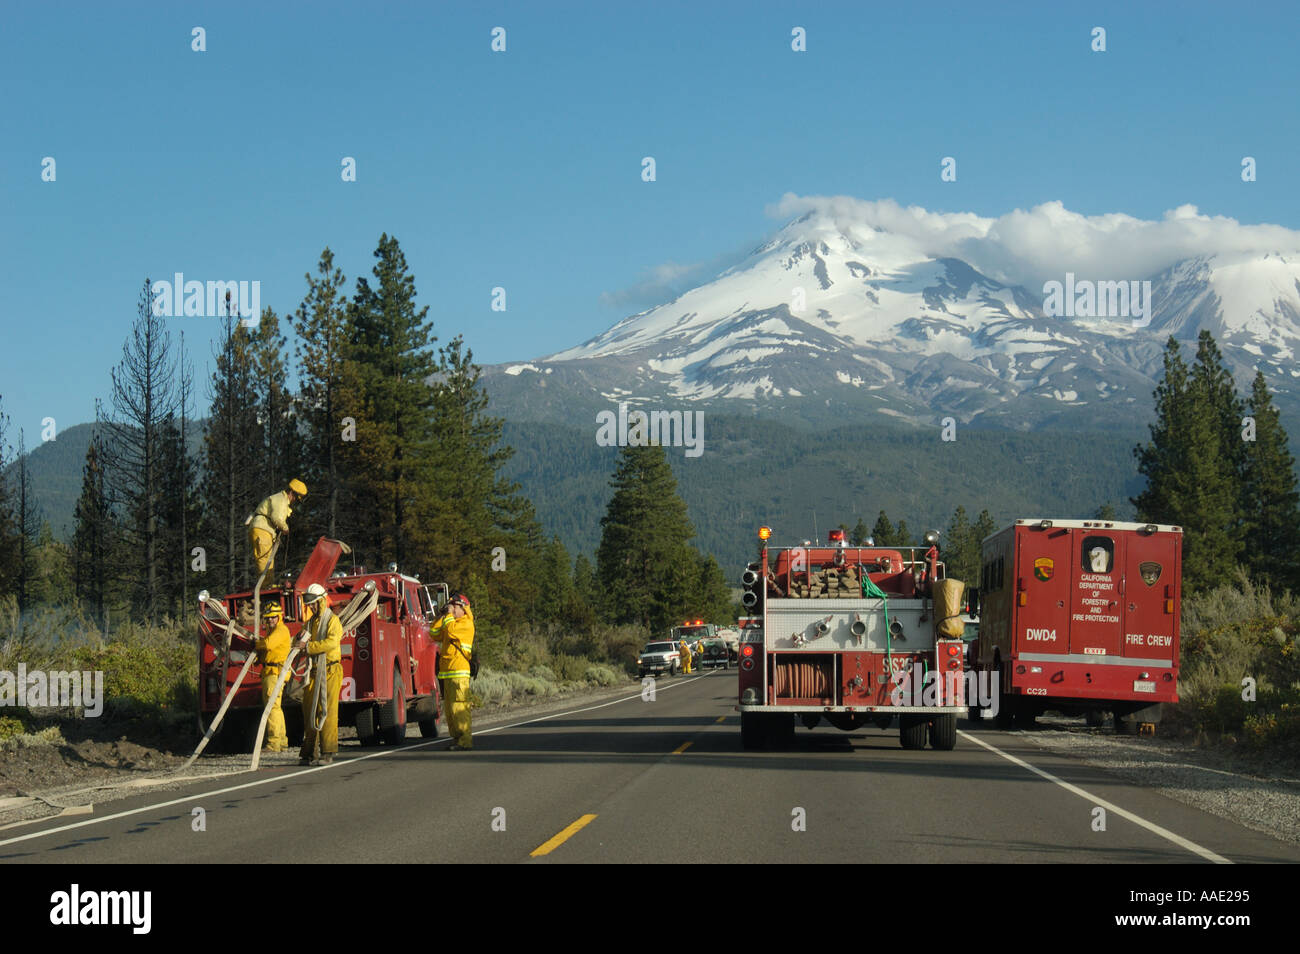 Image result for photos of mt shasta fire